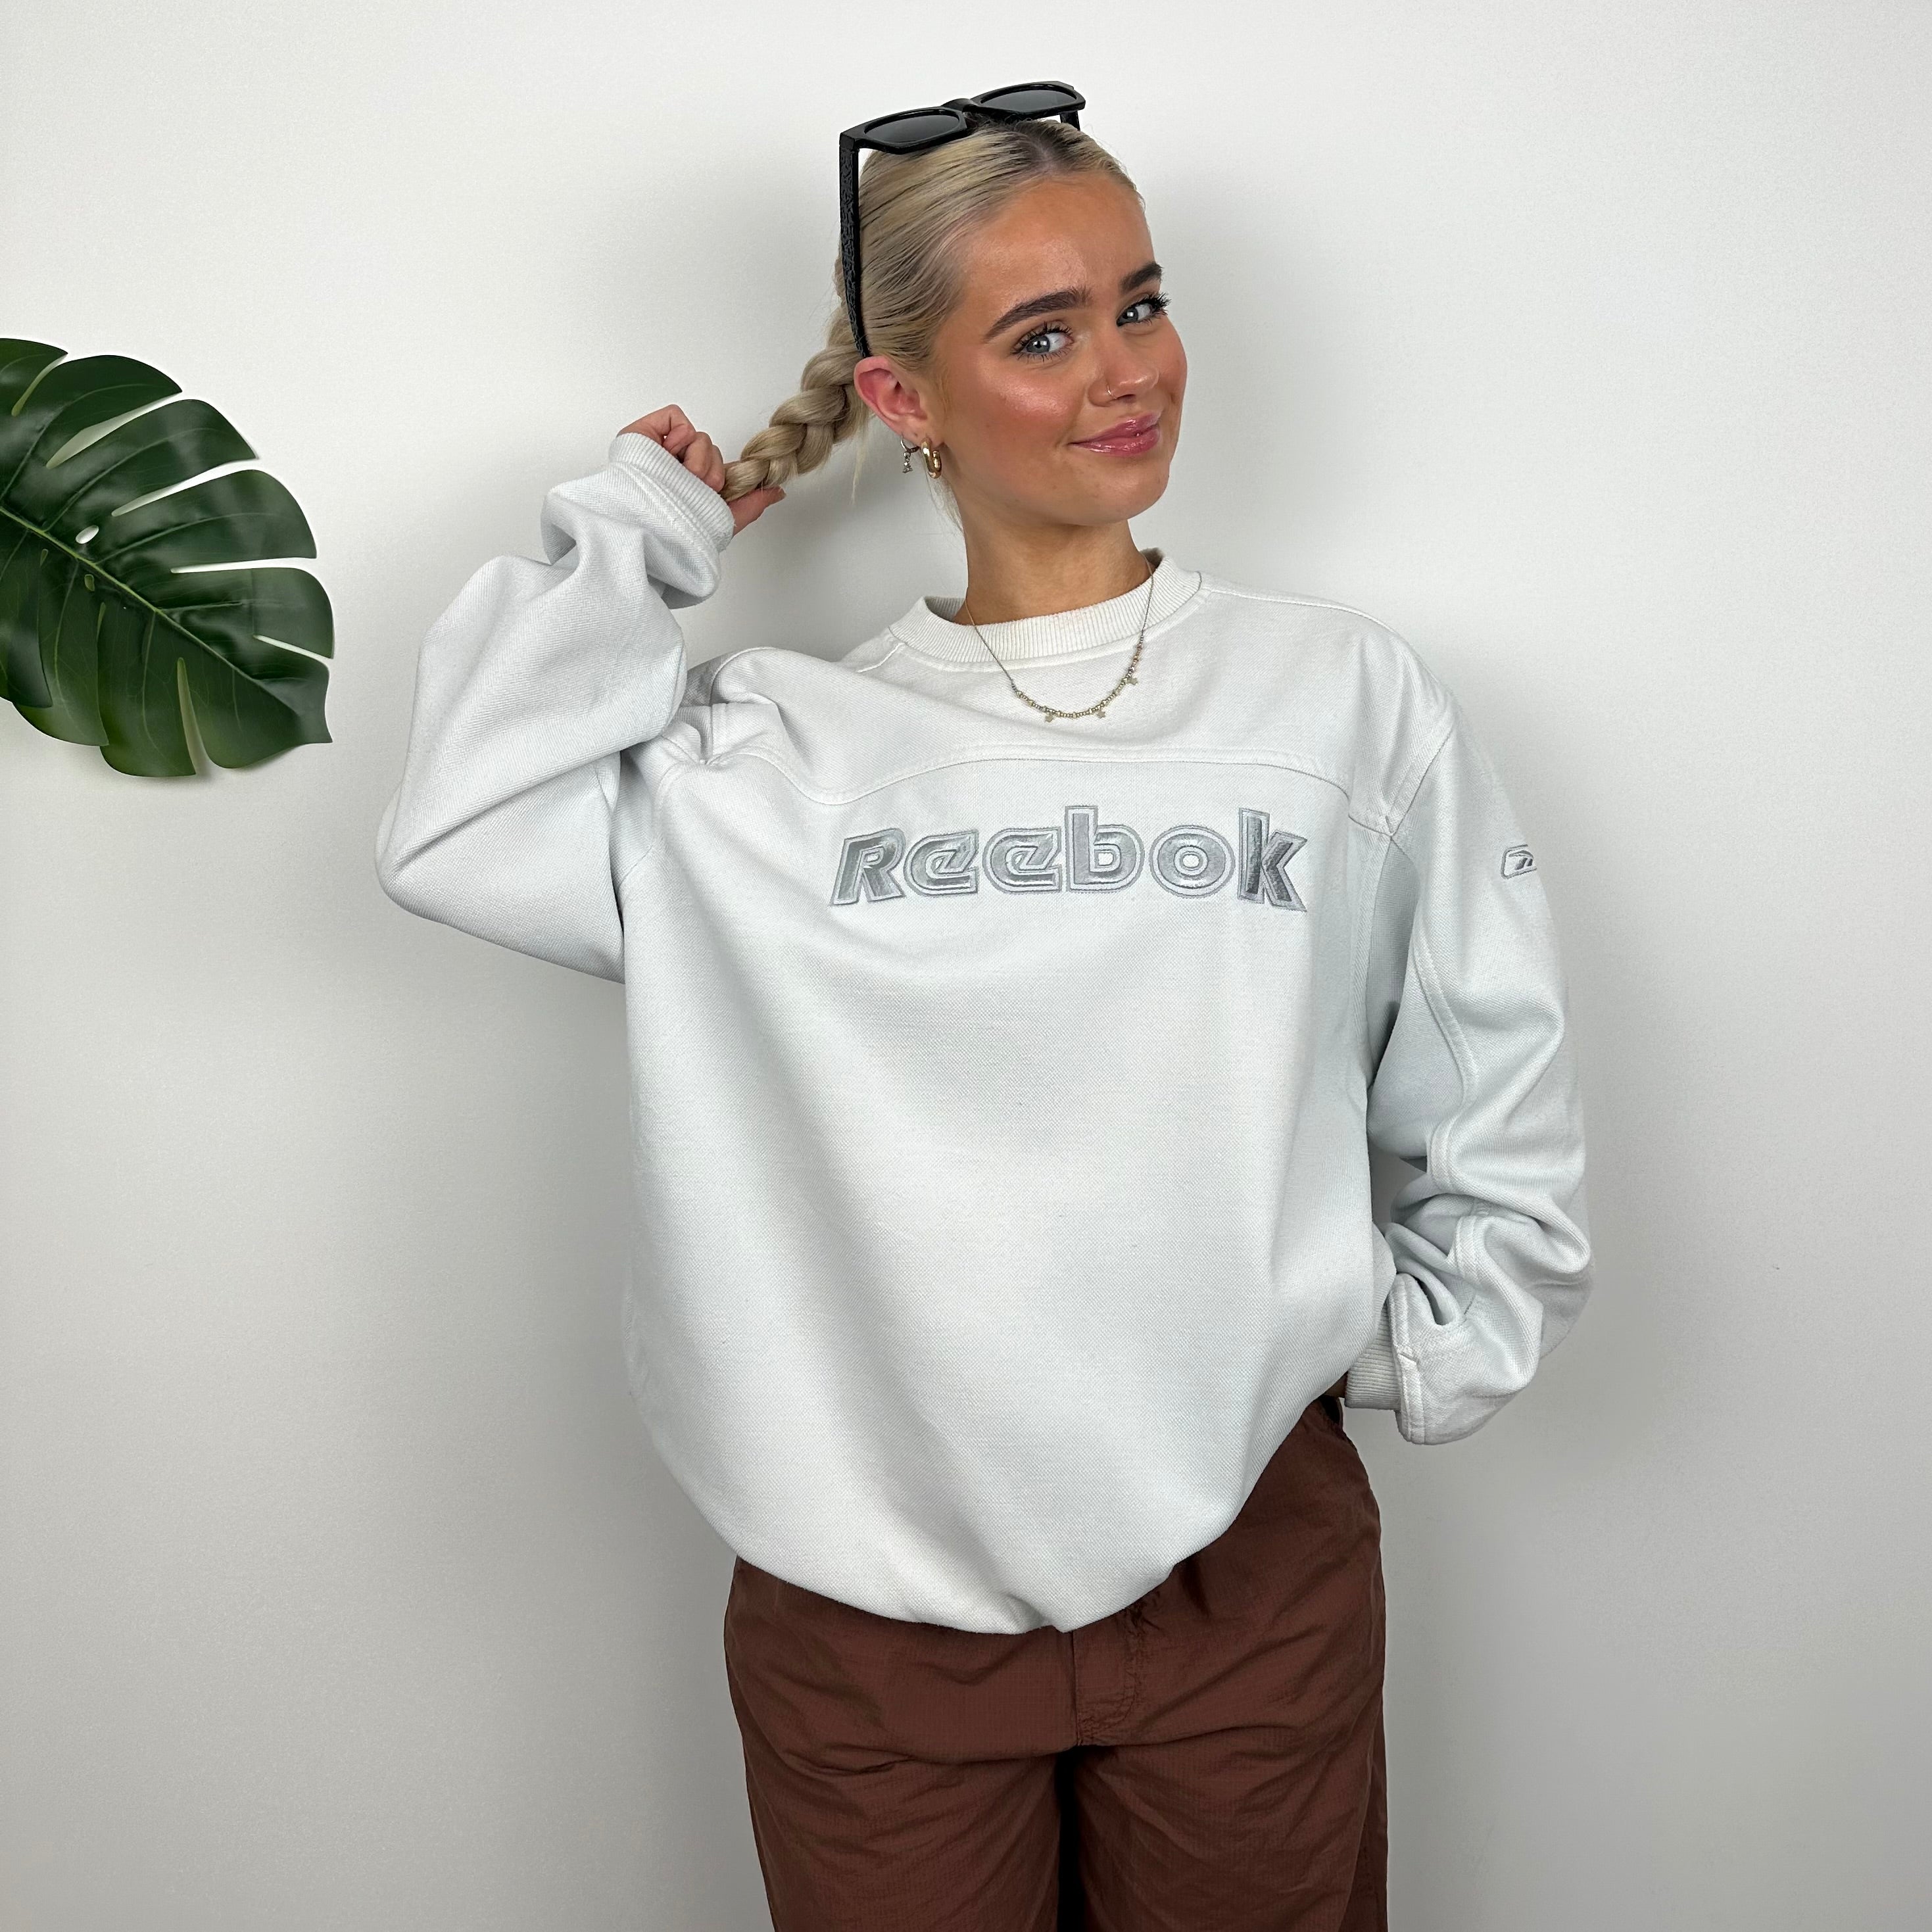 Reebok White And Silver Embroidered Spell Out Sweatshirt (M)